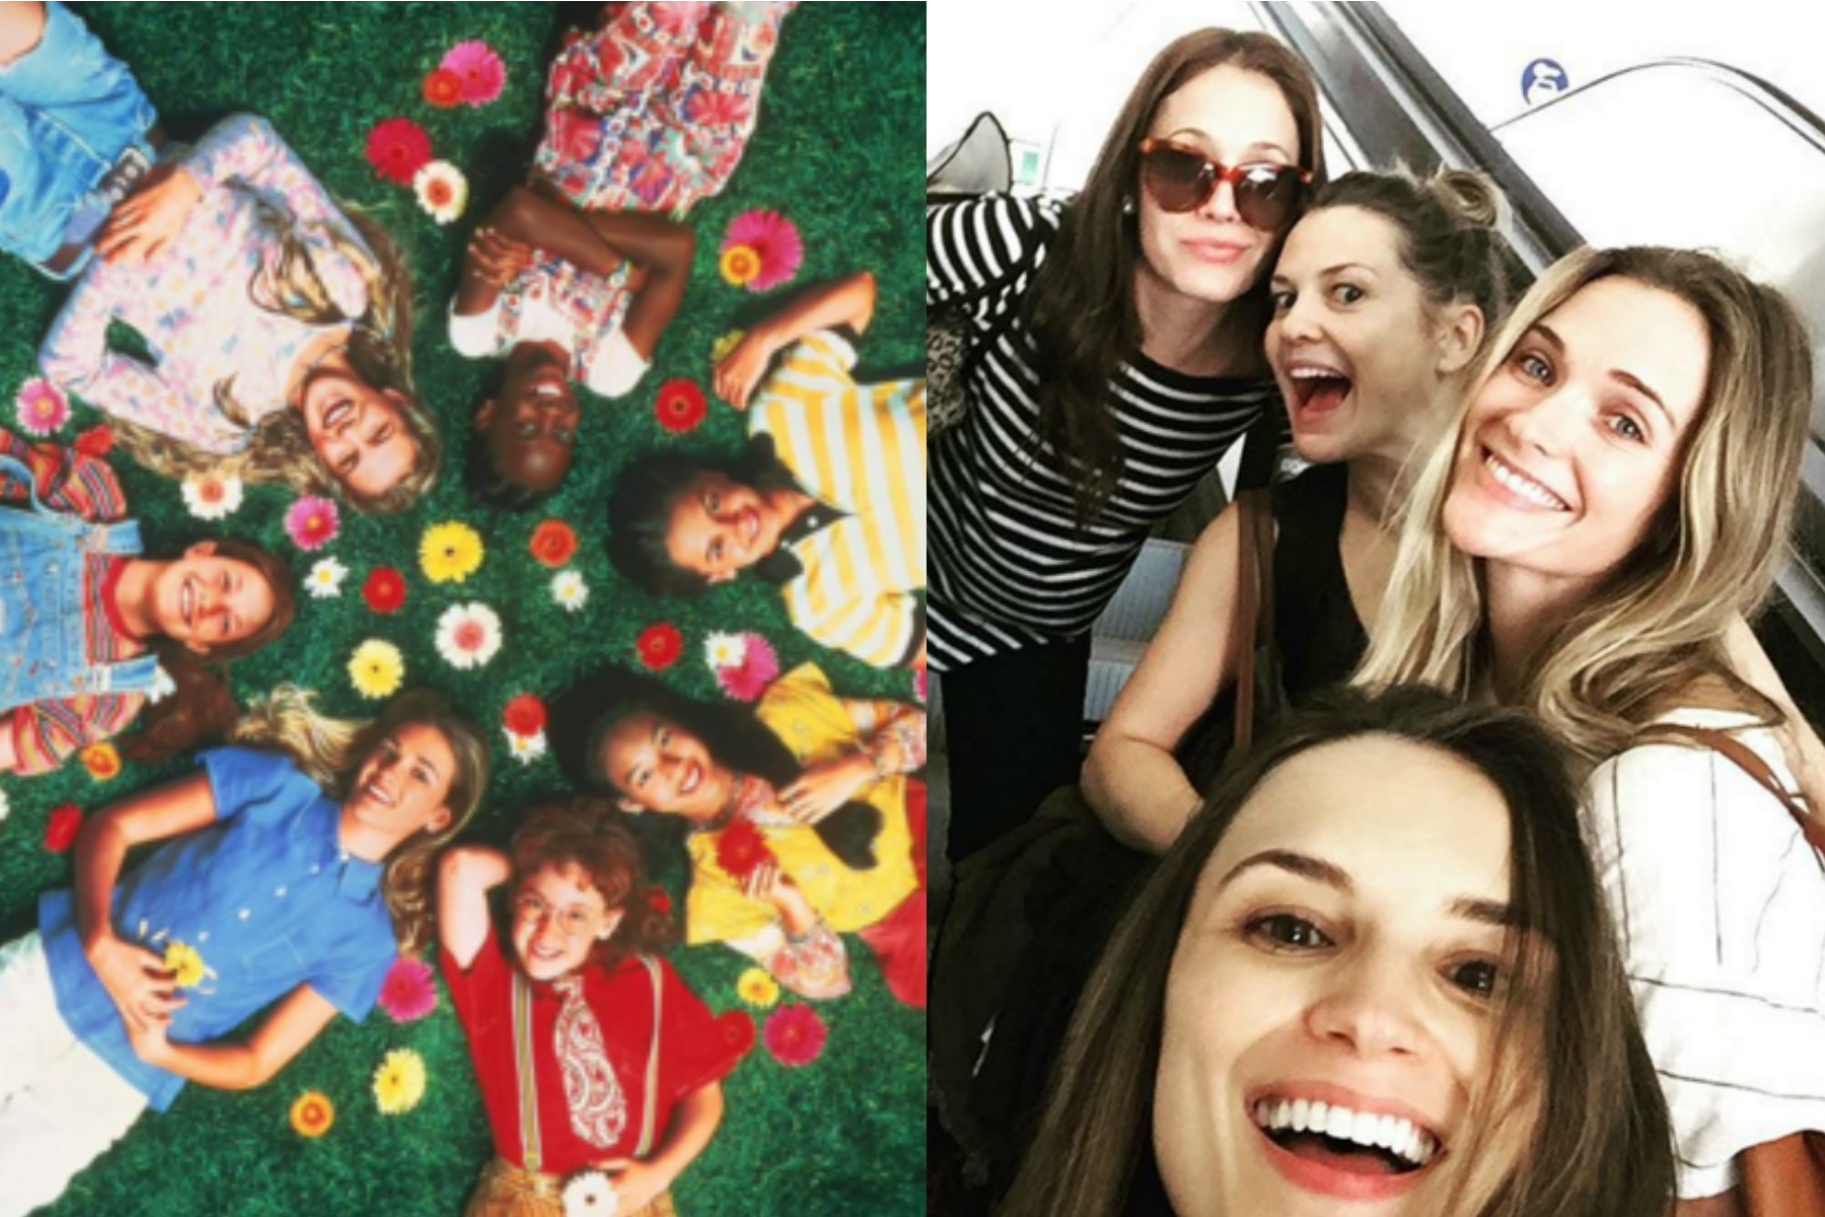 'The BabySitters Club' Cast Is All Grown Up On Instagram Very Real